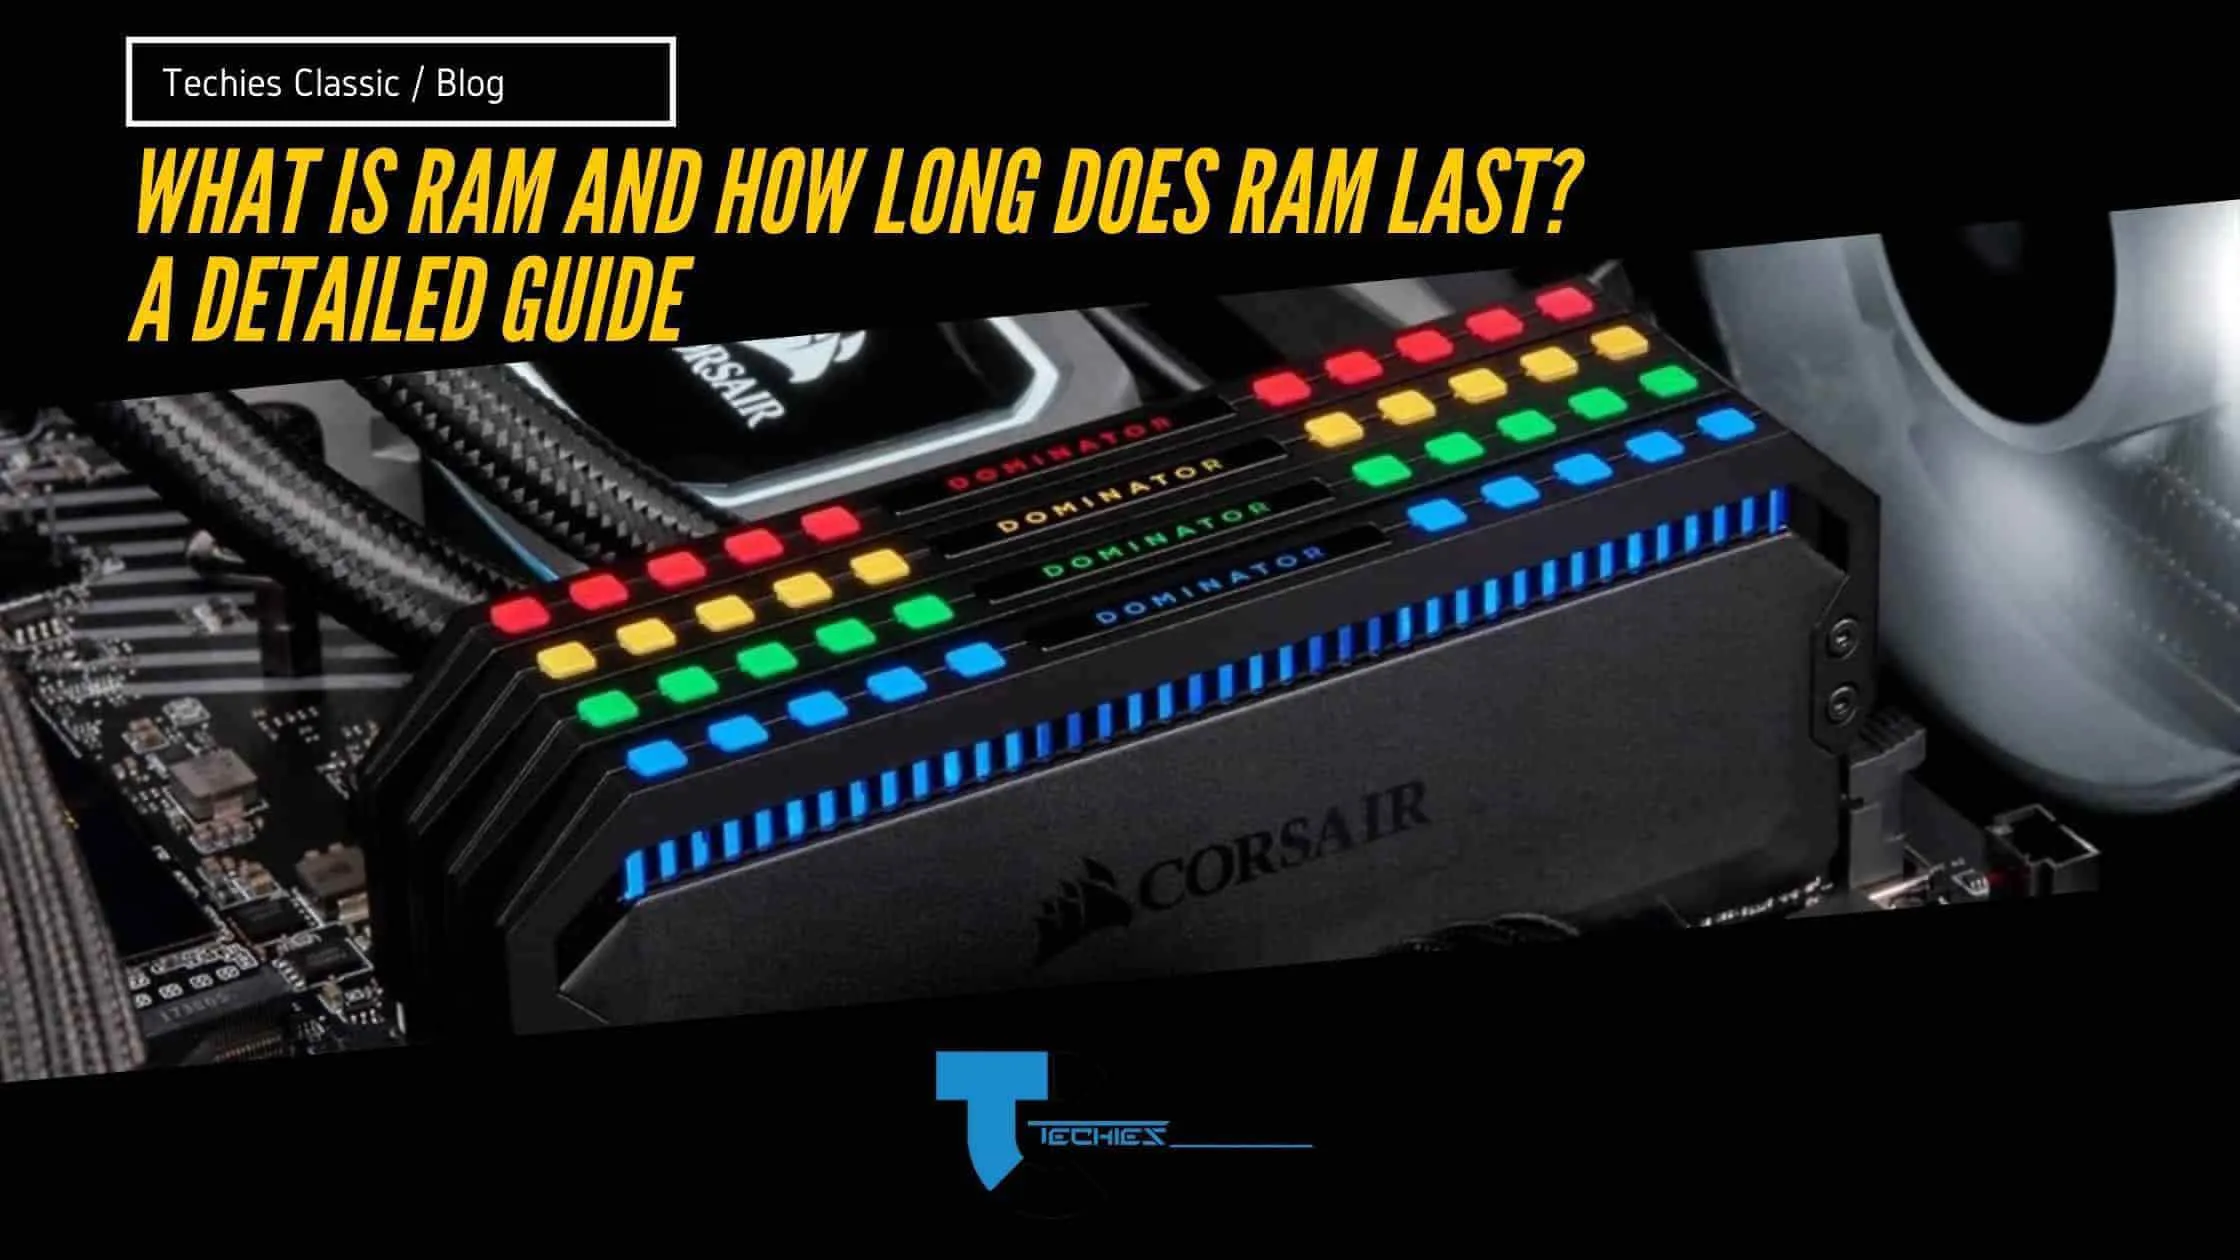 What is Ram and how long does ram last? A detailed guide